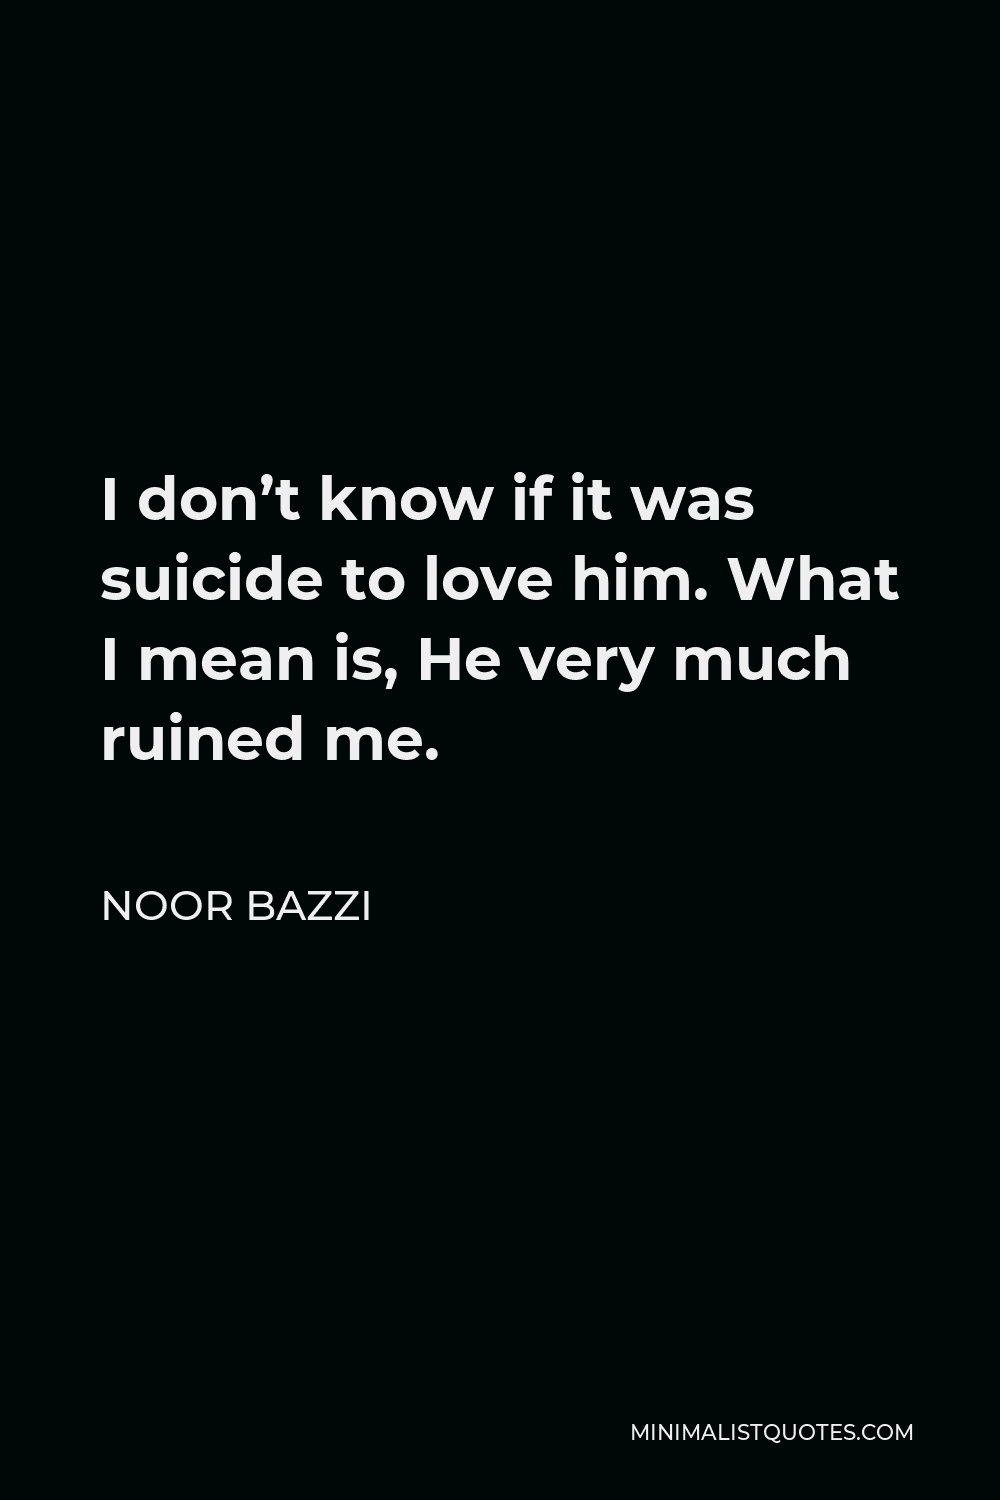 Noor Bazzi Quote - I don’t know if it was suicide to love him. What I mean is, He very much ruined me.